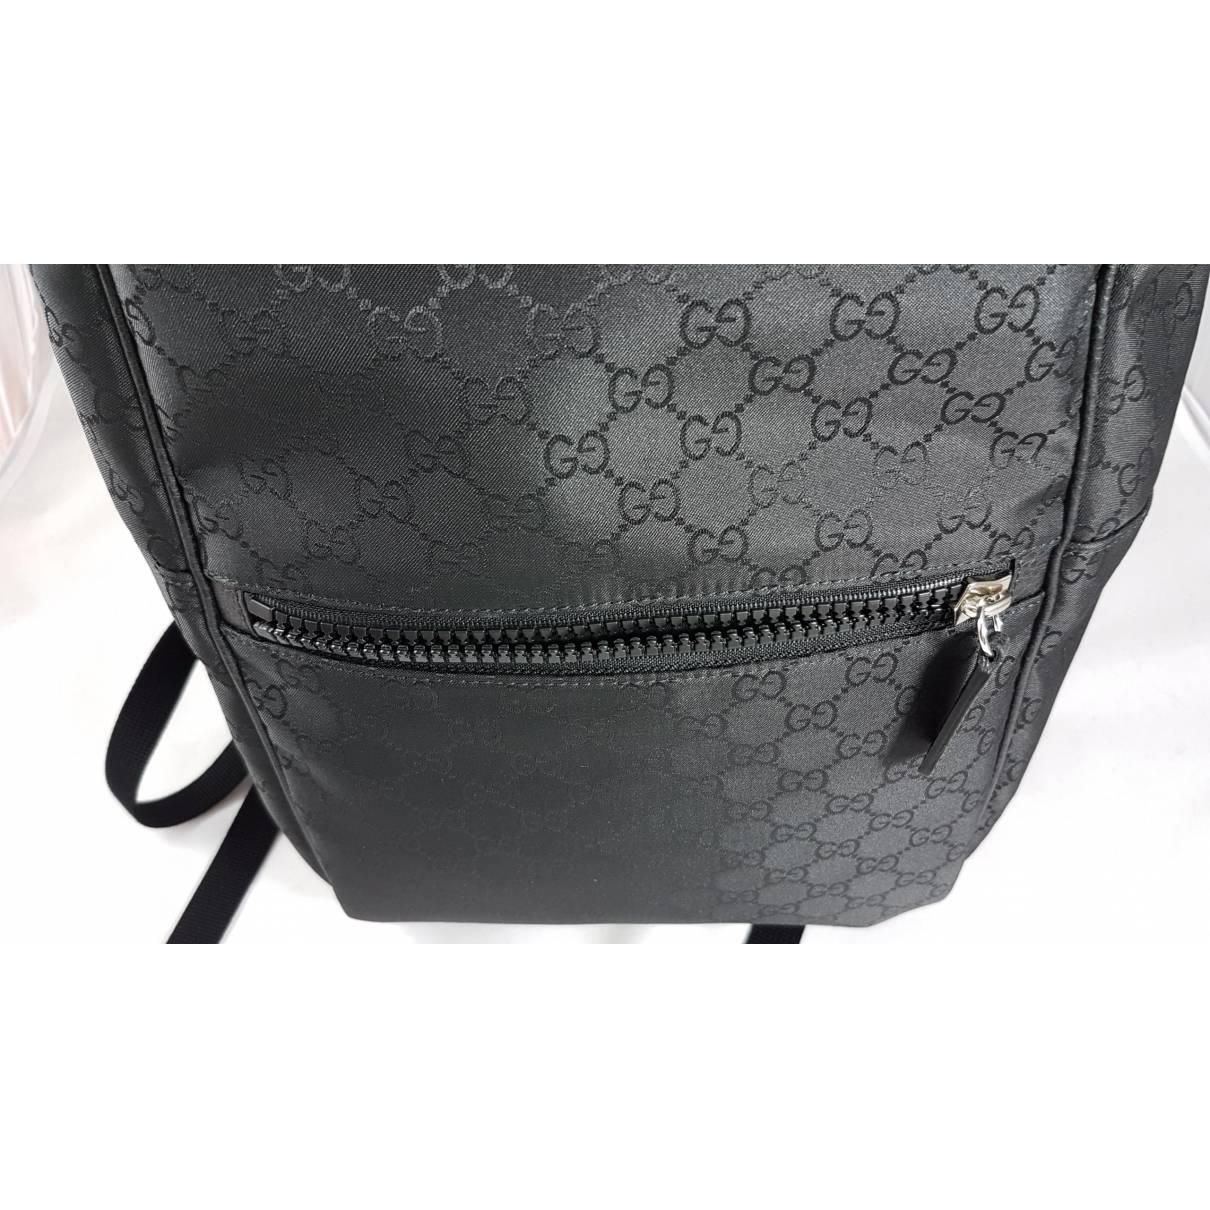 Gucci Black GG Guccissima Backpack Bag For Sale 3